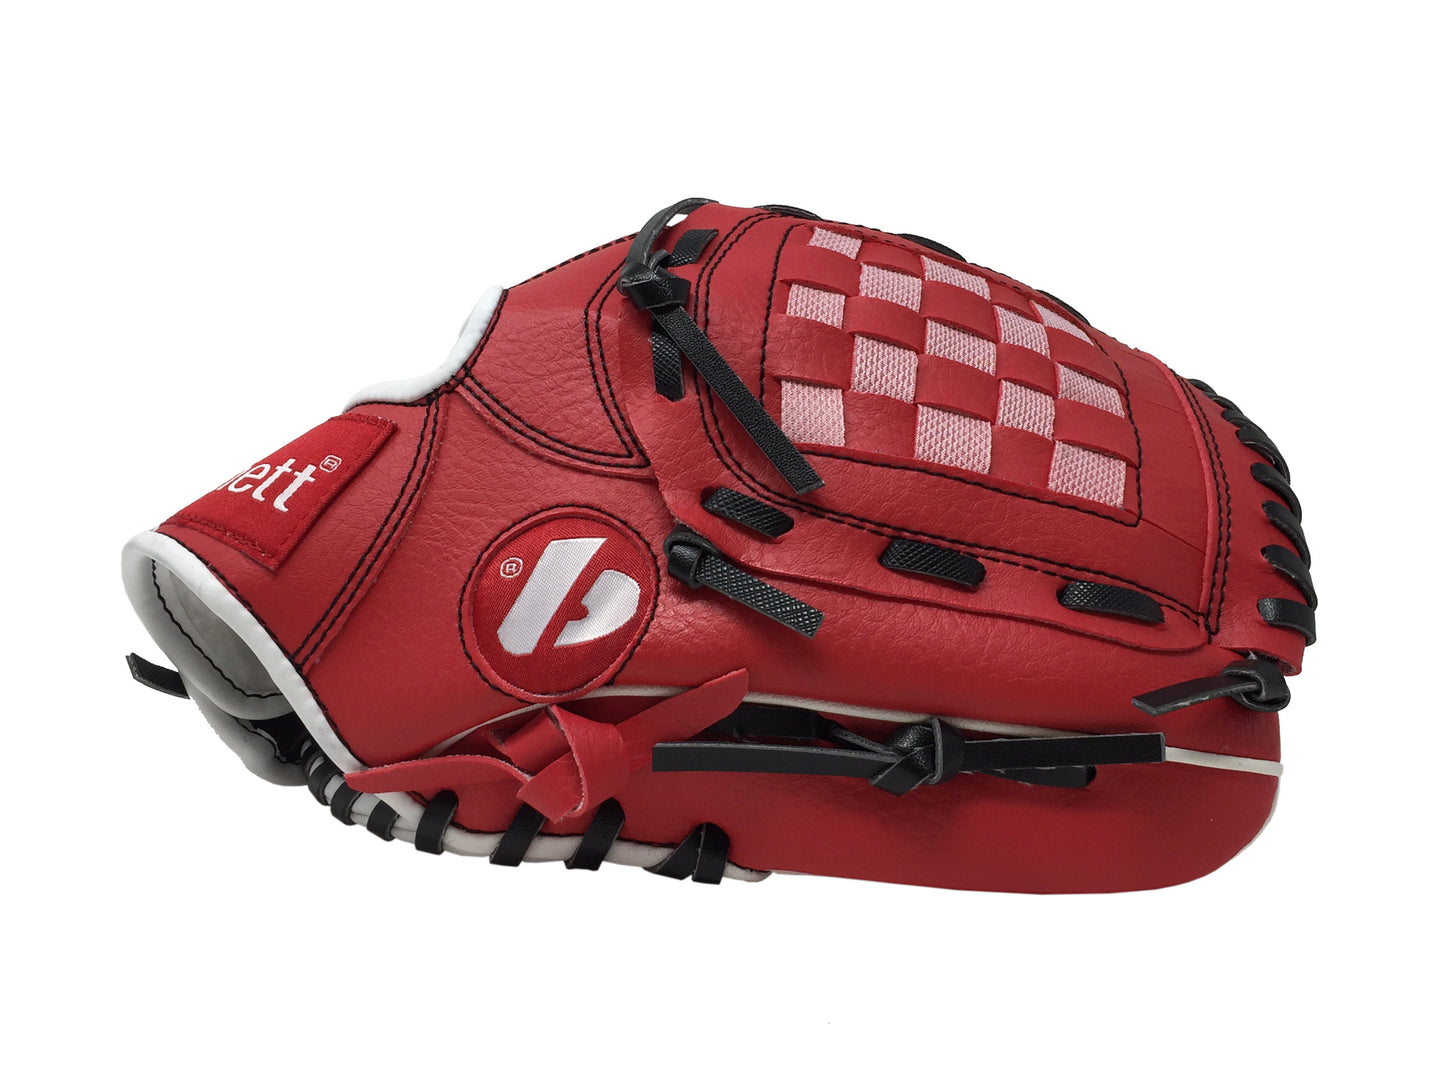 JL-105-baseball glove, outfiled, REG size 10.5" red